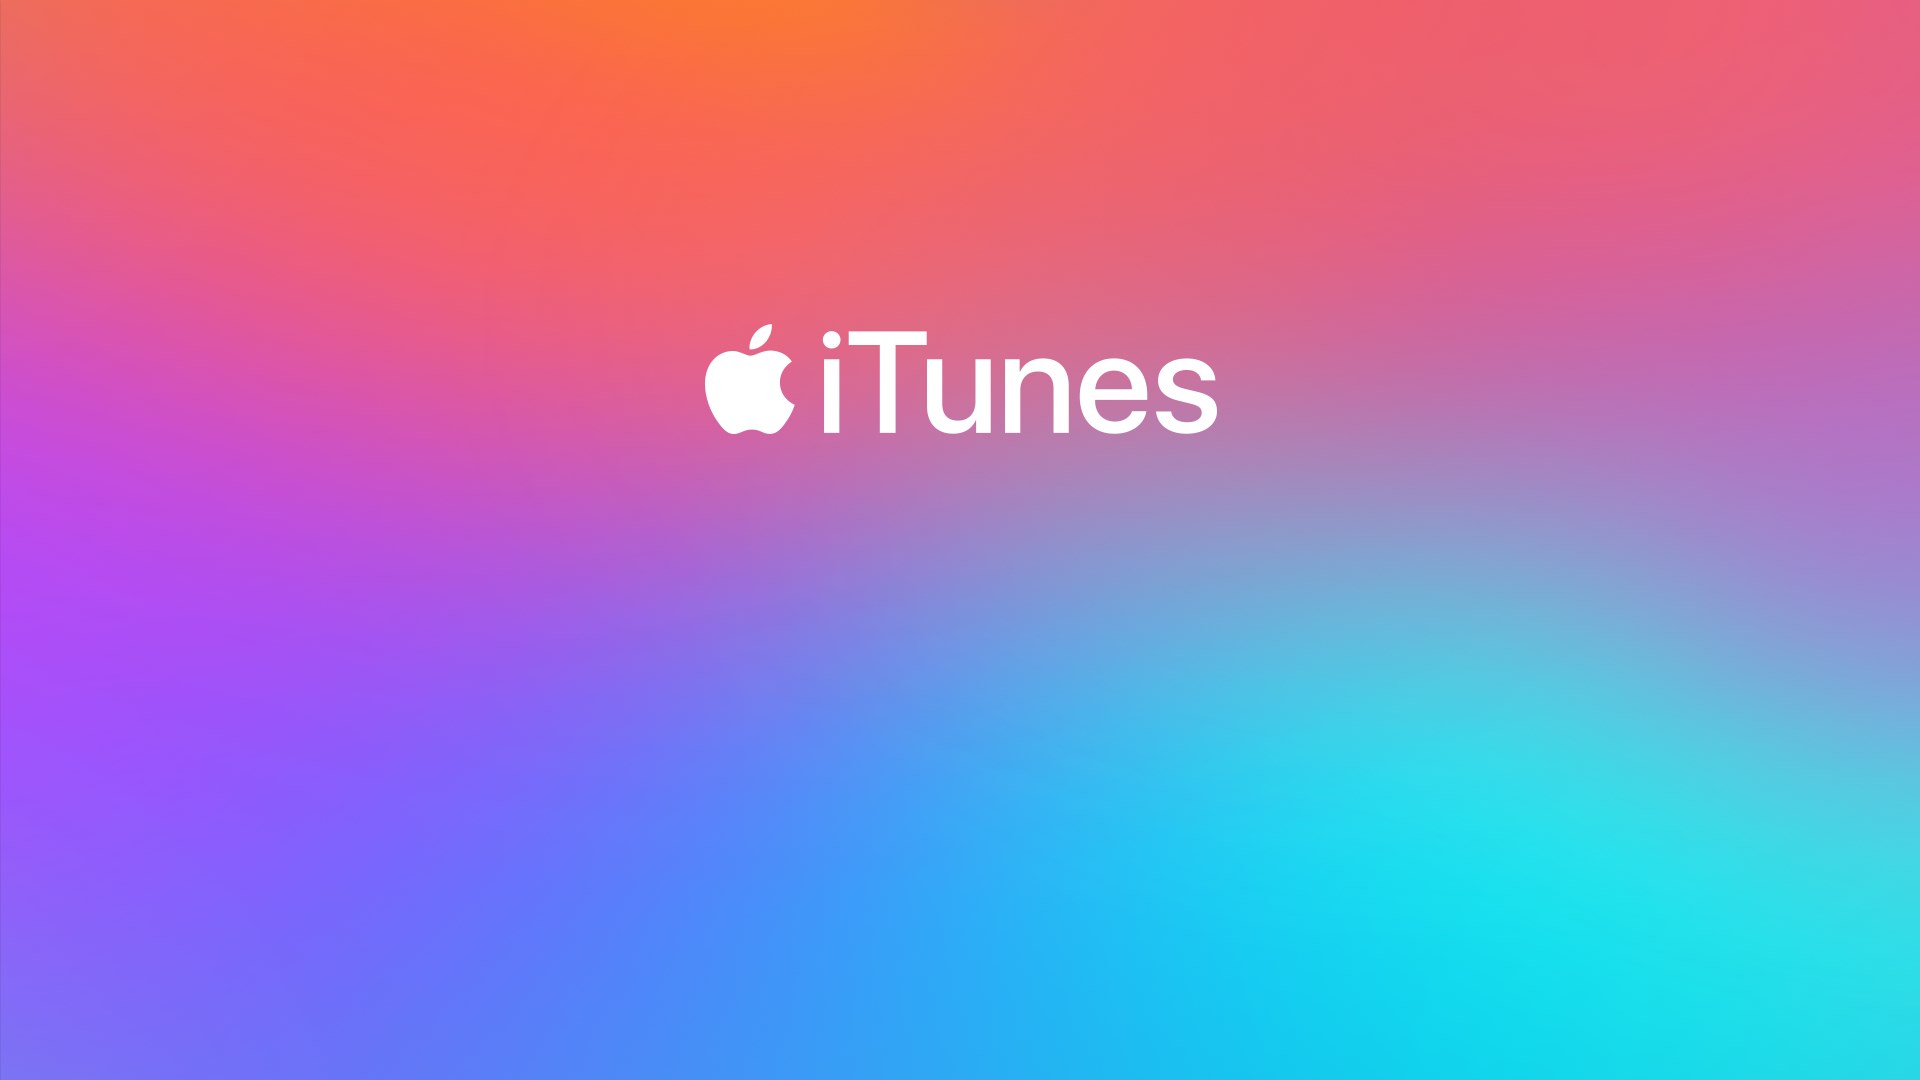 how to download free music to itunes from youtube